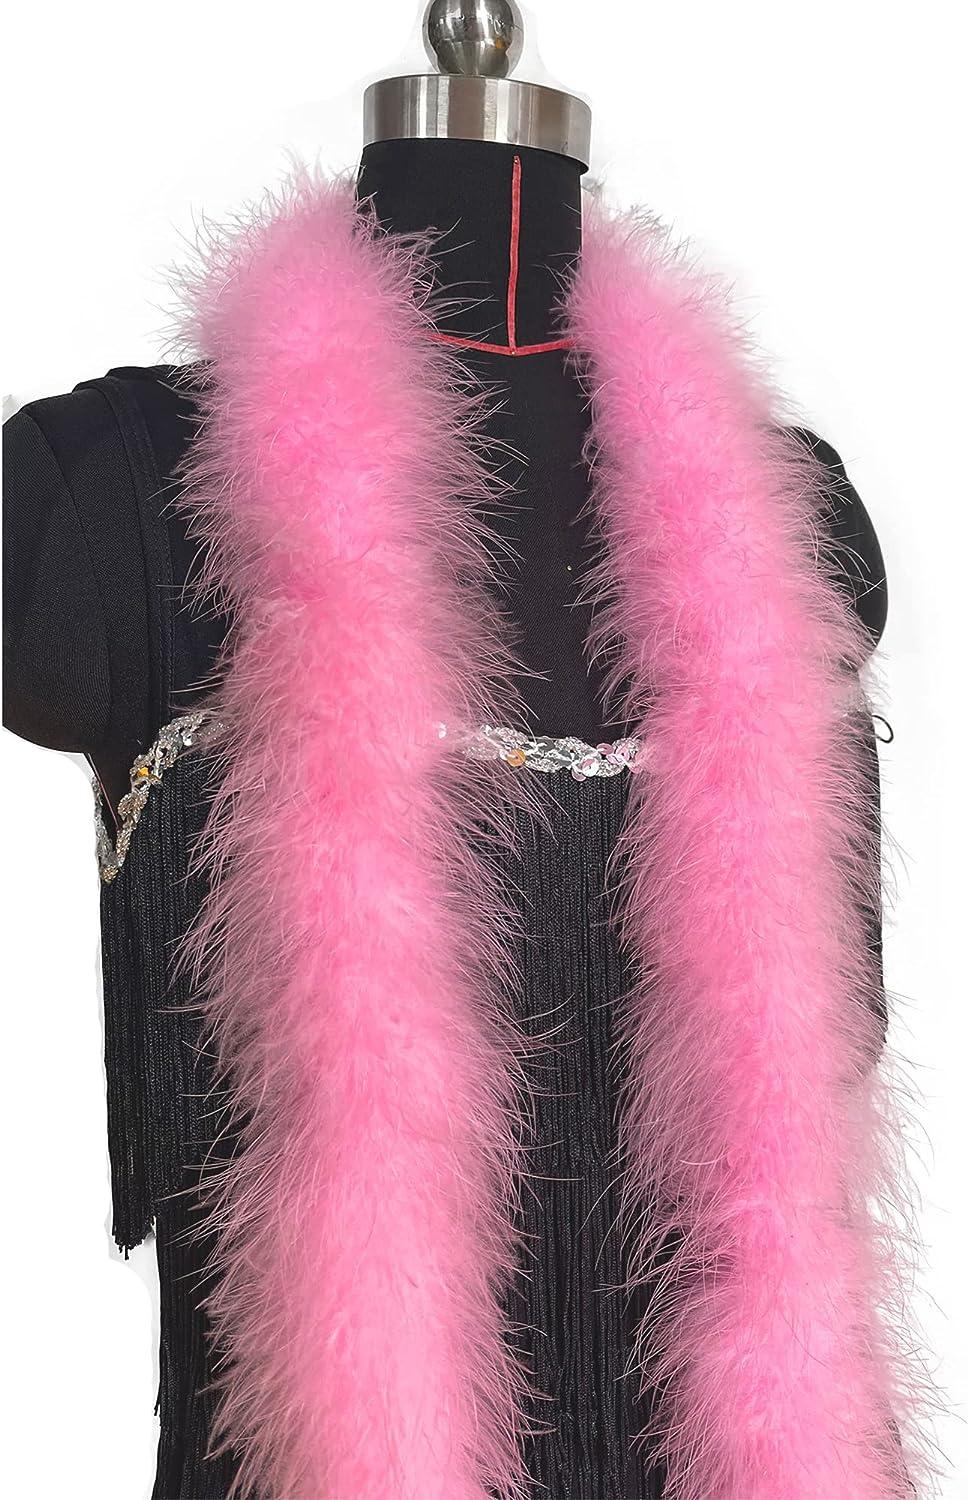 Light Pink Marabou Feather Boa - Feathers - Basic Craft Supplies